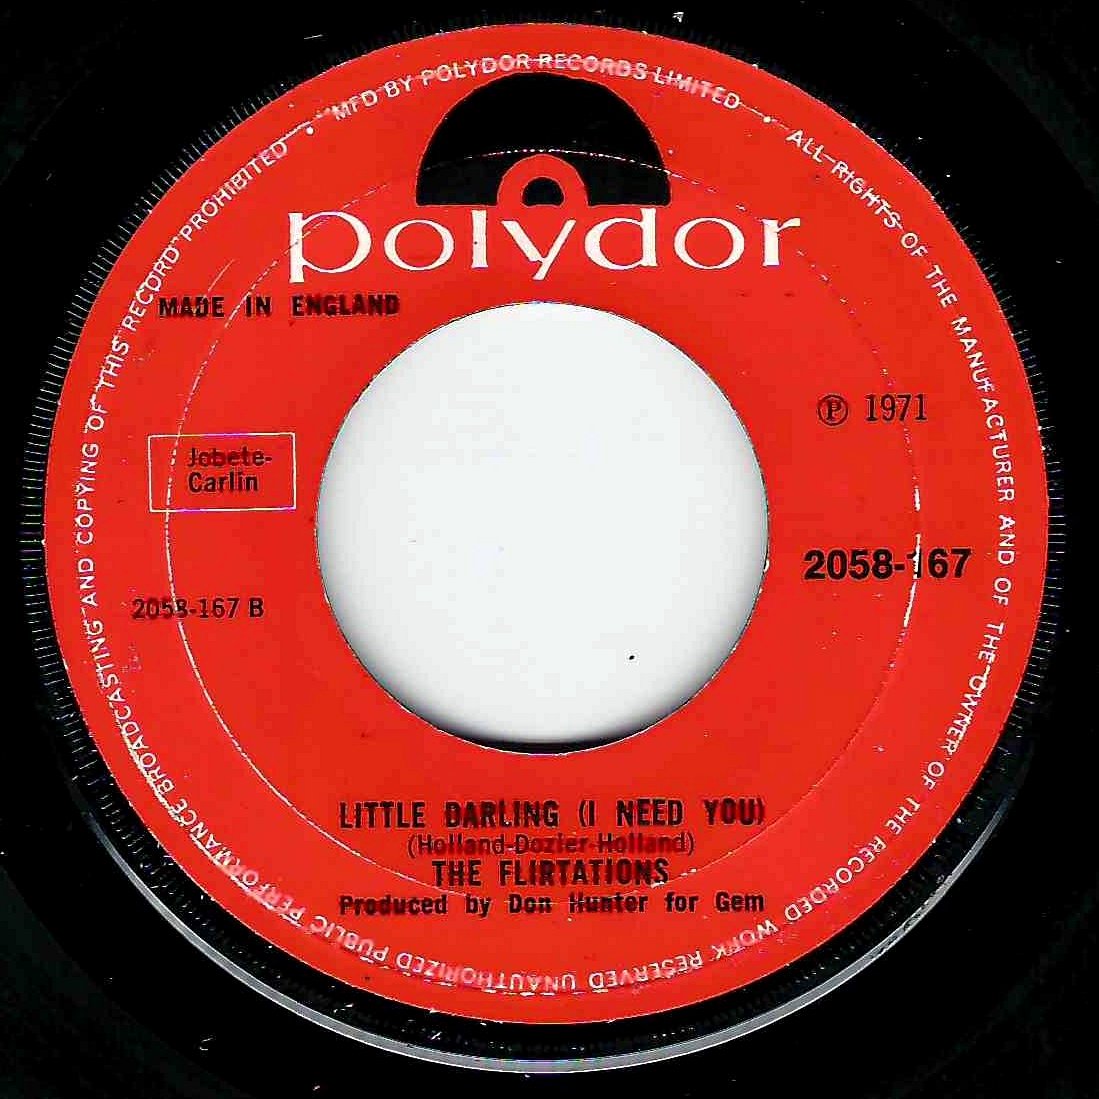 Little Darling (I Need You)
The Flirtations
Album : Take Me In Your Arms And Love Me/Little Darling (I Need You) (single), 1971
#TheFlirtations
Spotify :
open.spotify.com/track/6wZjqvtA…
Youtube : 
youtu.be/wFO2HRadMF4
Bonus :
A la télé en 1971, si fraiches
youtu.be/CB0XB-xczTo